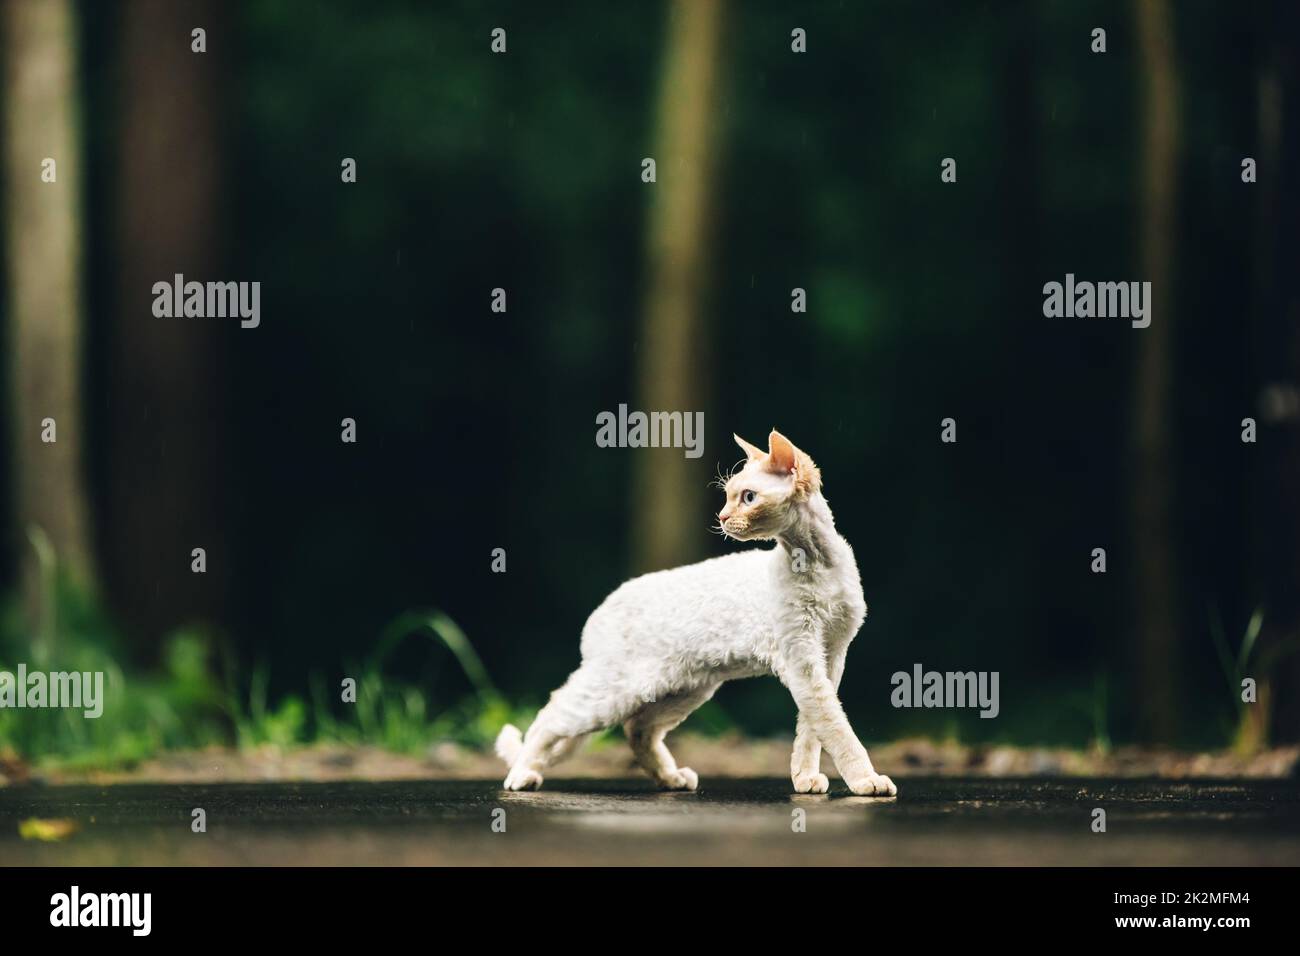 Amazing Happy Pets. Devon Rex Cat With White Fur Color On Walkway Under Rain. Beautiful Playful Curious Funny Cute Devon Rex Cat Walking Looking Back Stock Photo